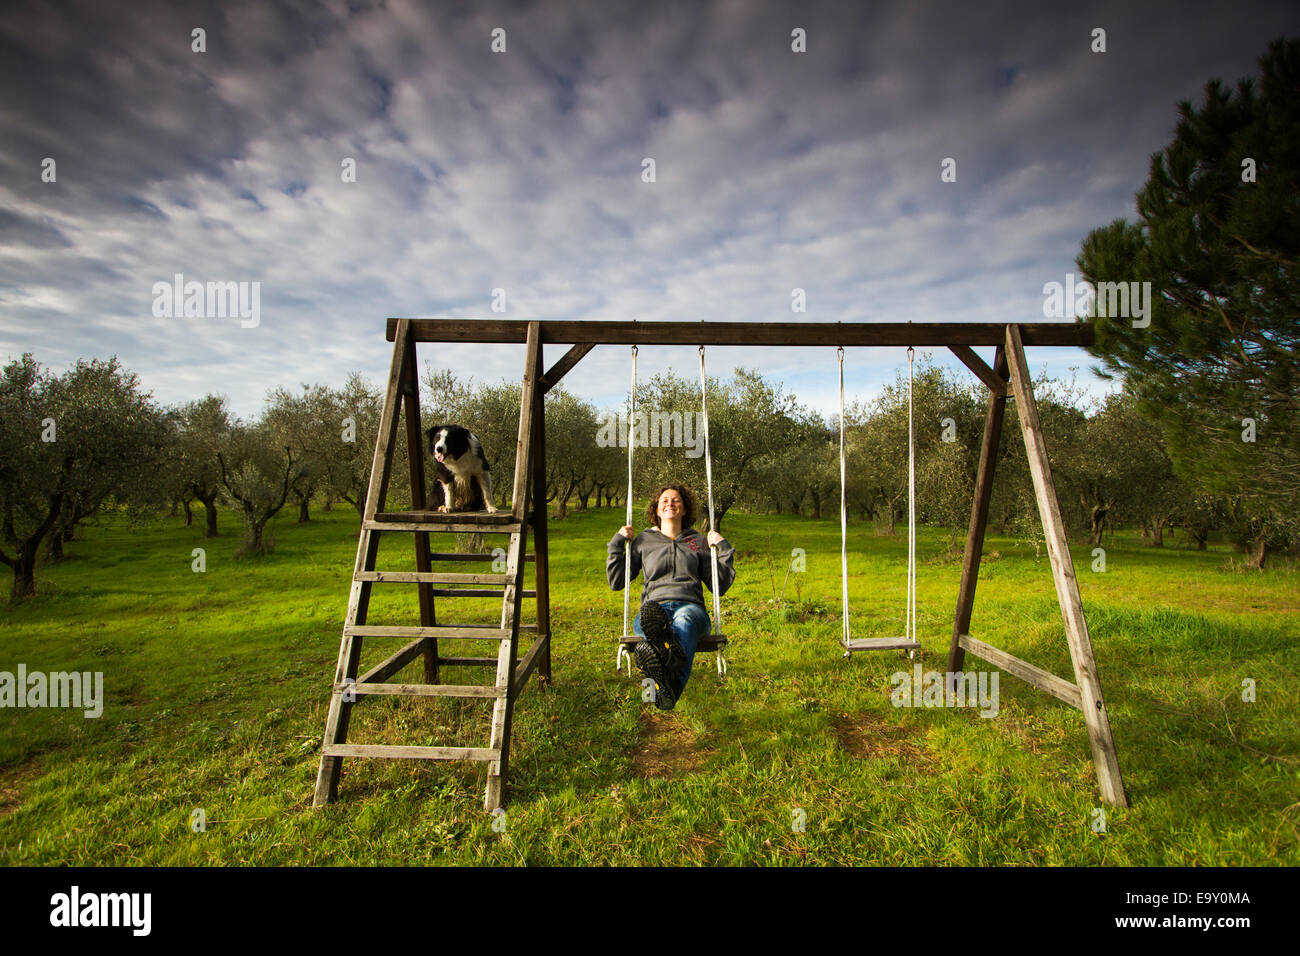 Girl swinging on a wooden swing in front of an olive grove, Tuscany, Italy Stock Photo